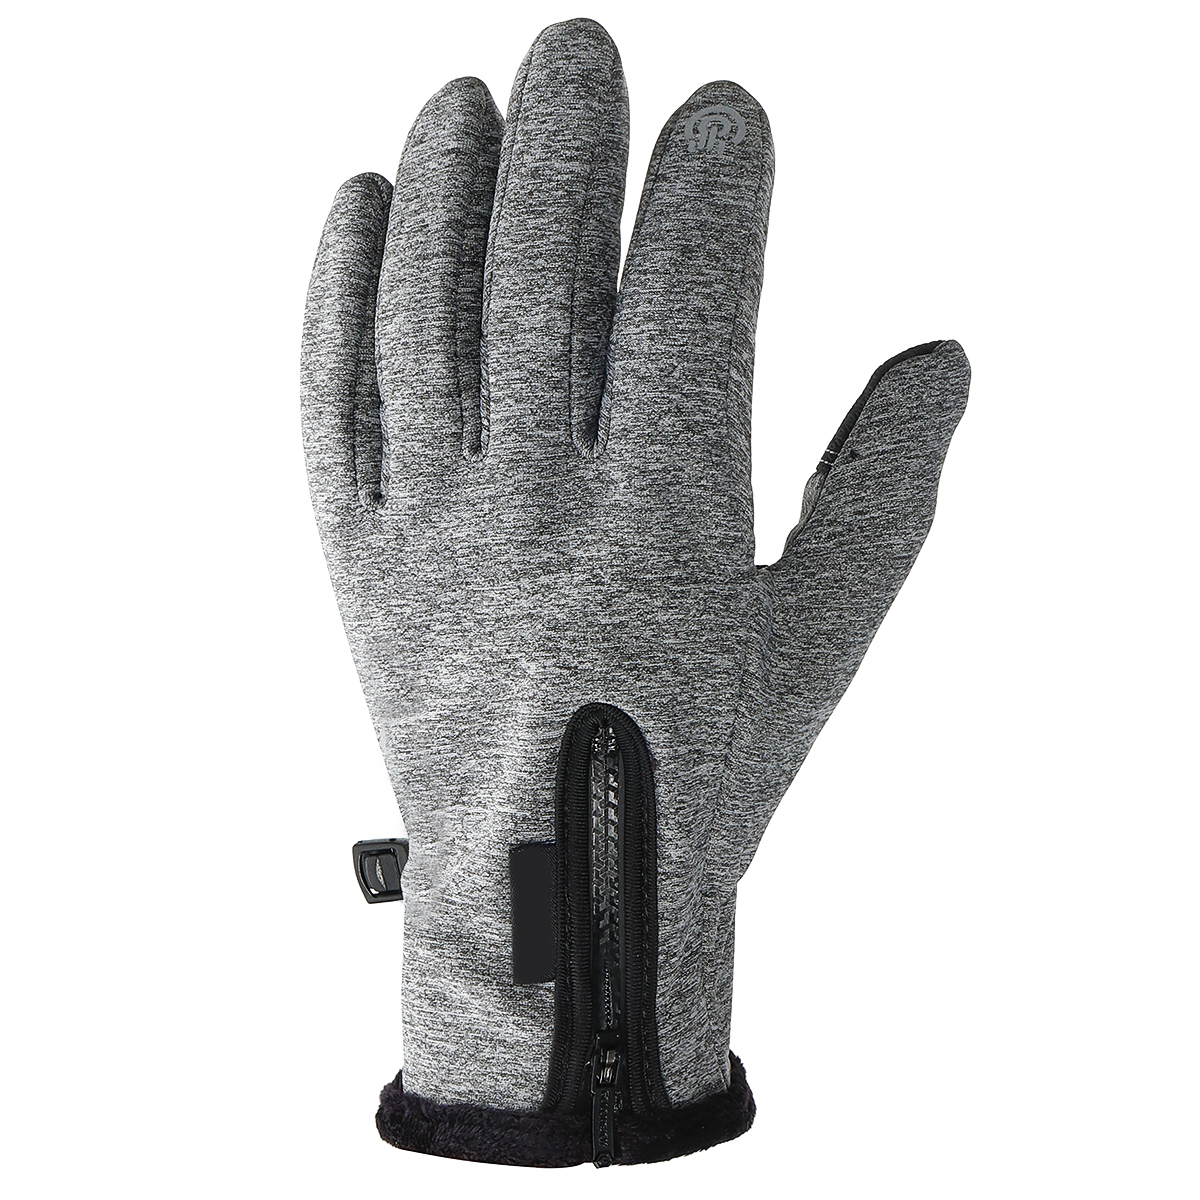 XL-Size-Winter-Warm-Waterproof-Windproof-Anti-Slip-Touch-Screen-Outdoors-Motorcycle-Riding-Gloves-1856137-5